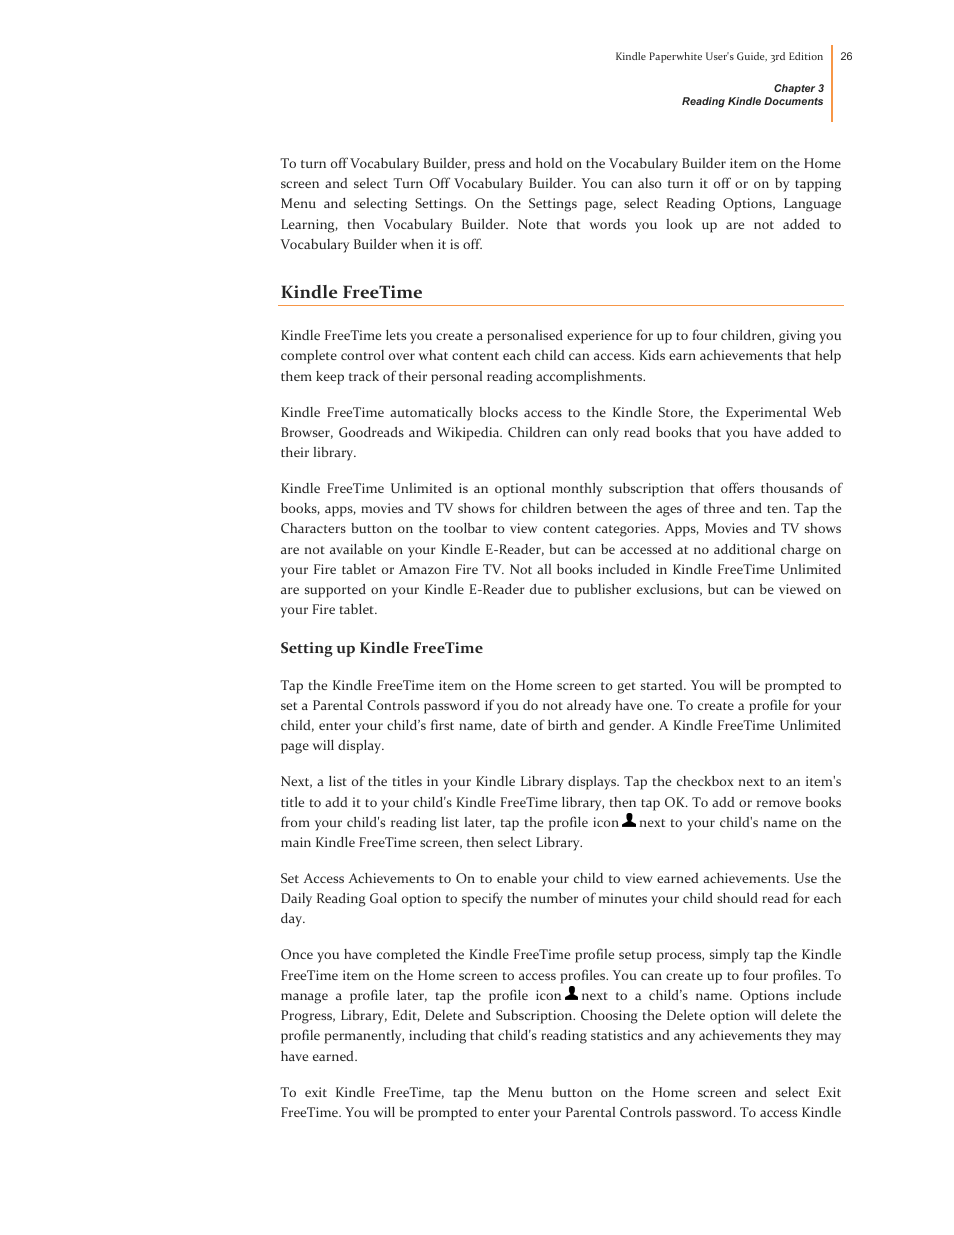 Kindle freetime, Setting up kindle freetime | Kindle Paperwhite (2nd Generation) User Manual | Page 26 / 47